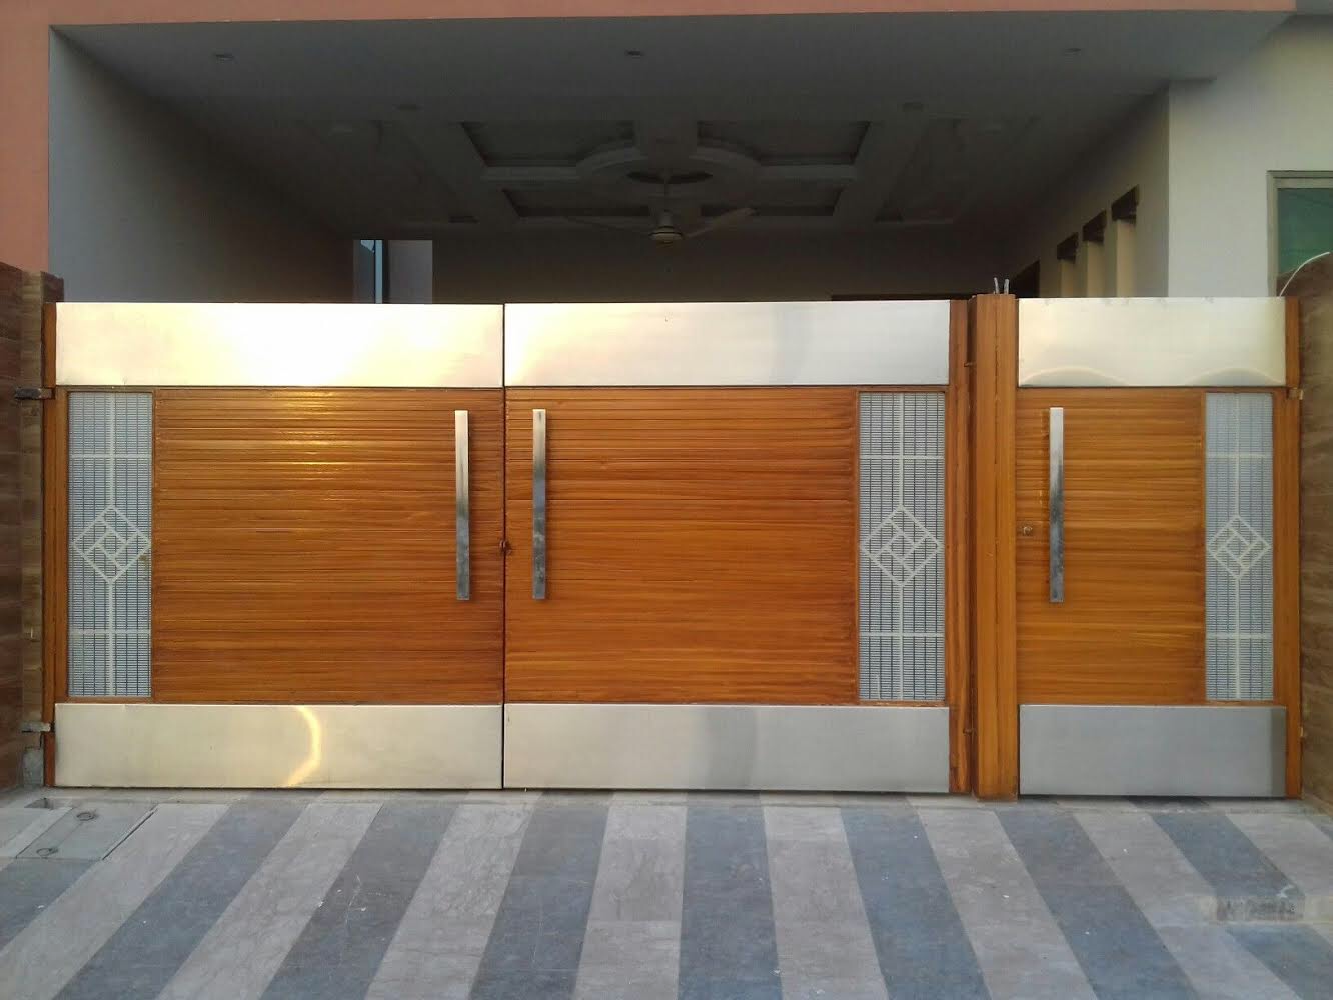 STAINLESS STEEL GATE WITH ACP – Commercial hotel kitchen equipment